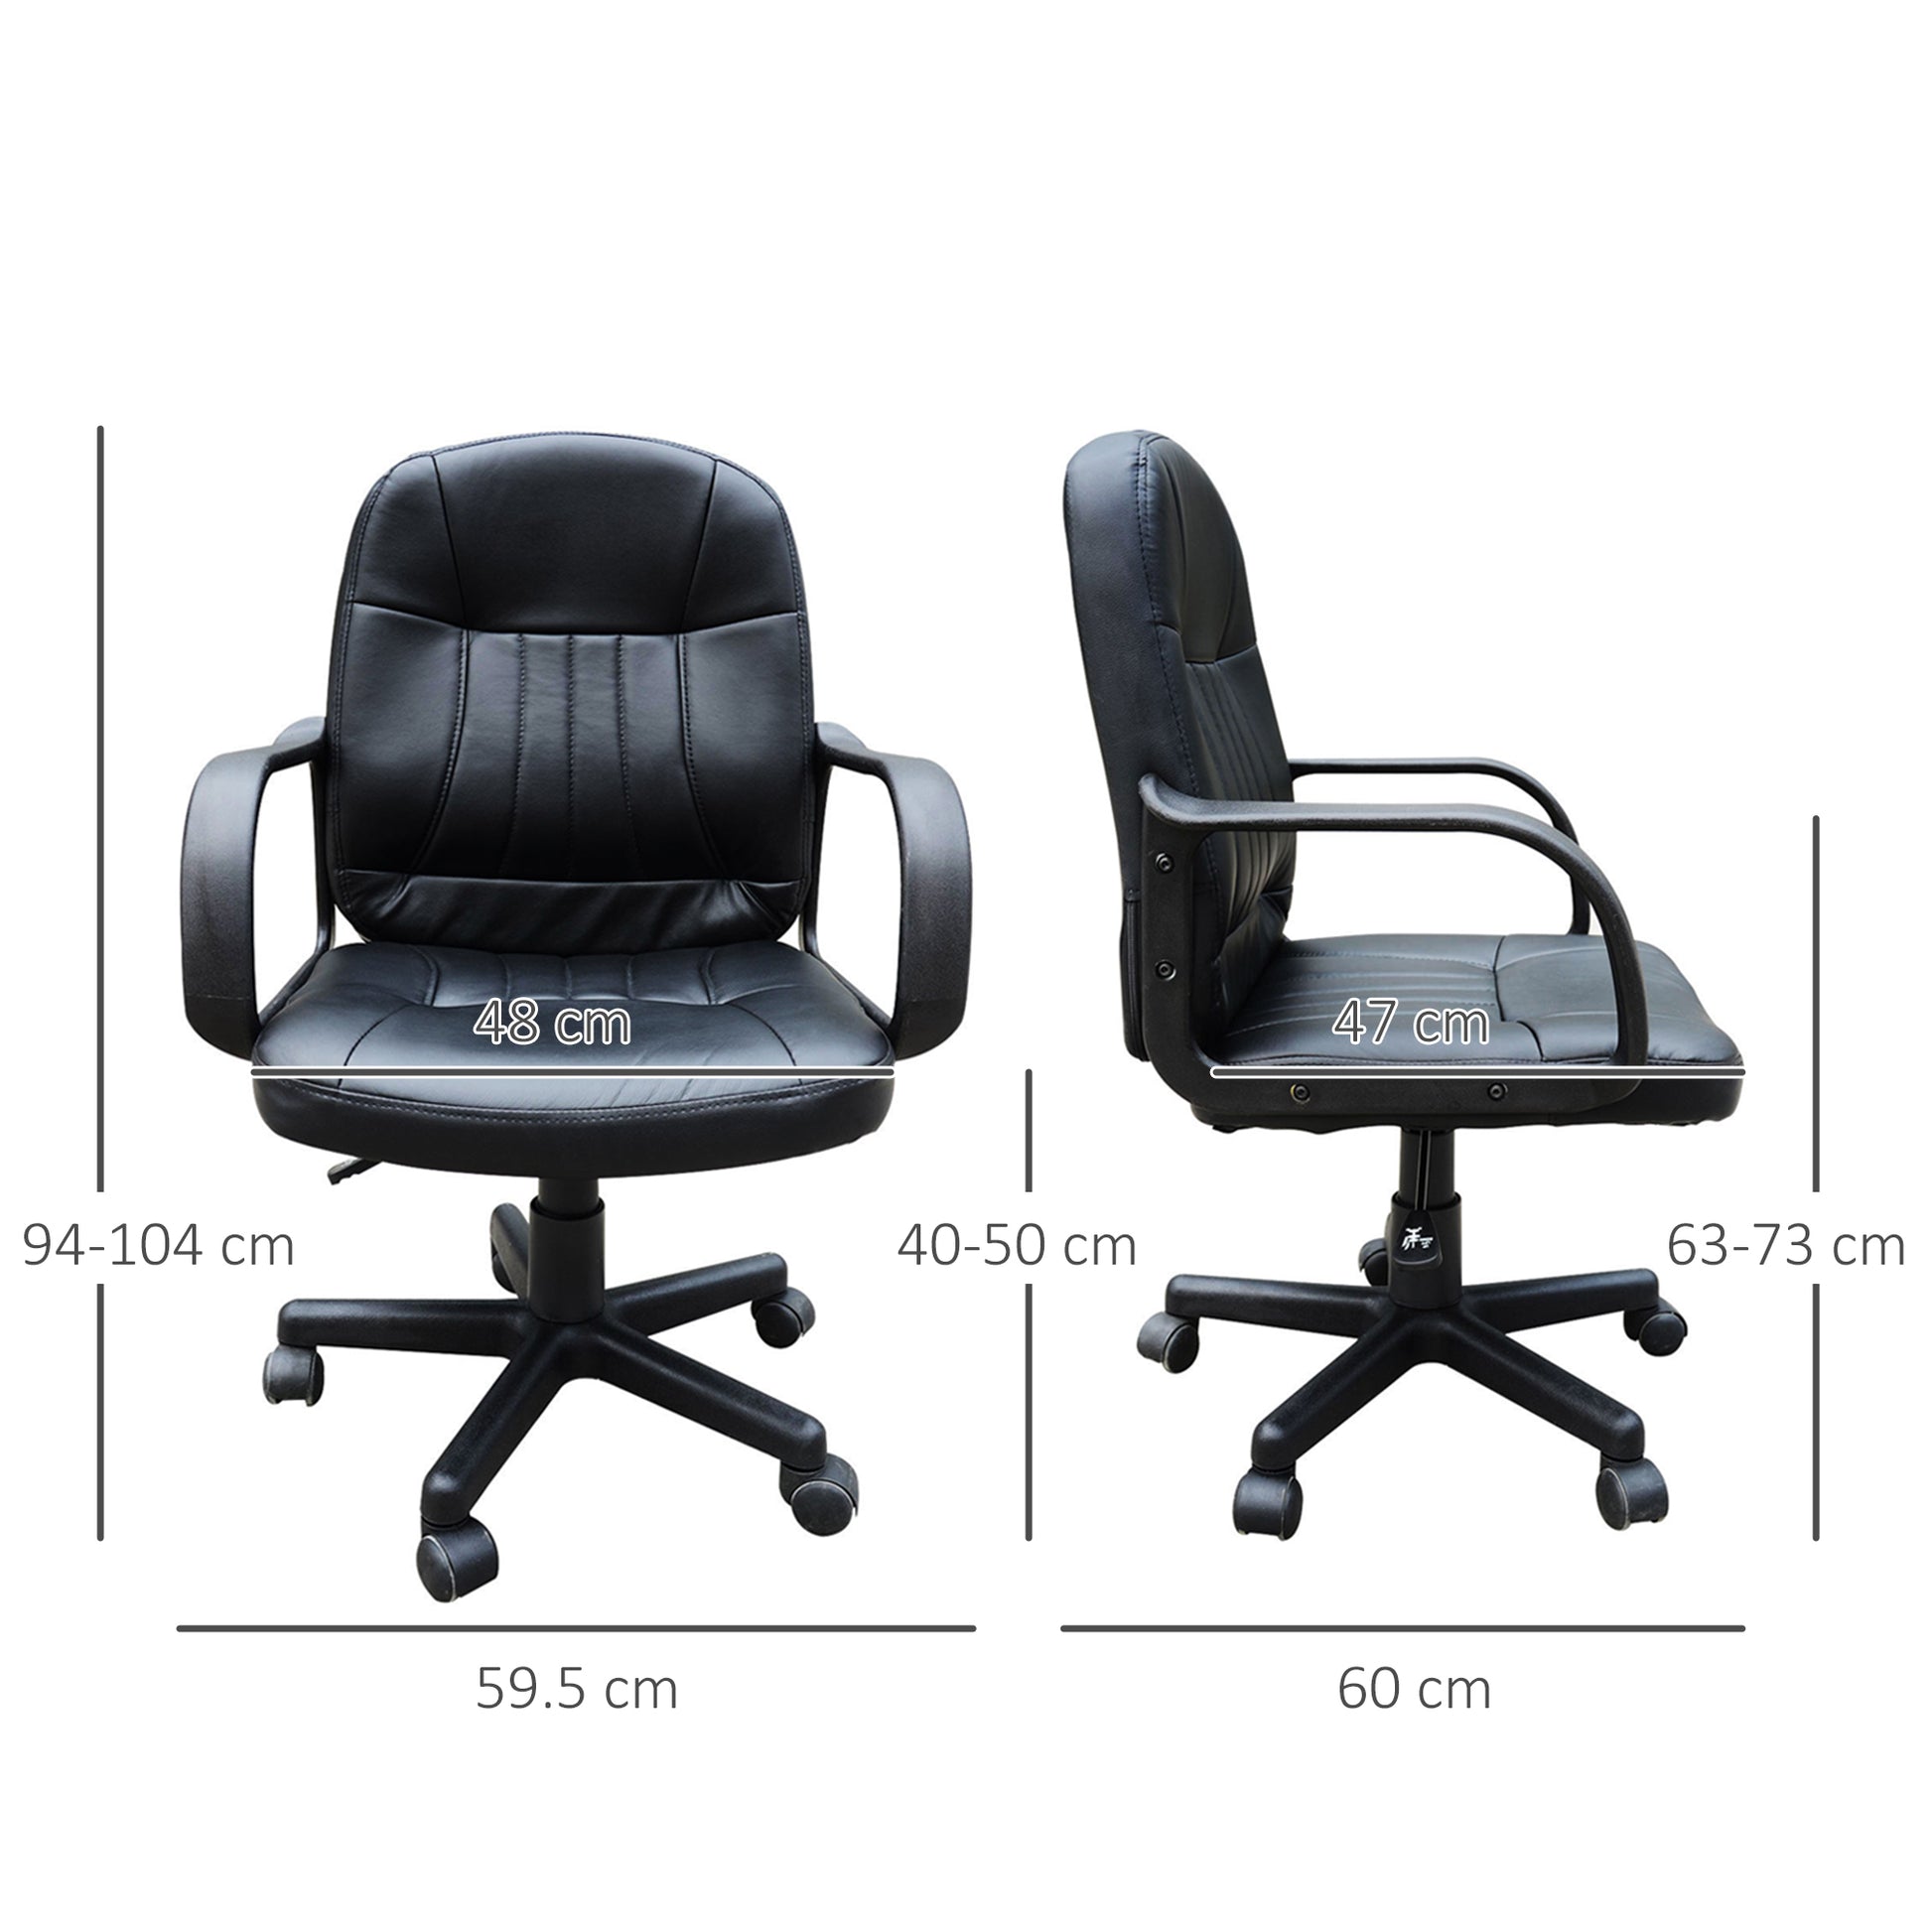 Swivel Executive Office Chair, PU Leather Desk Chair, Computer Chair, Gaming Seater, Black, HOMCOM, 3